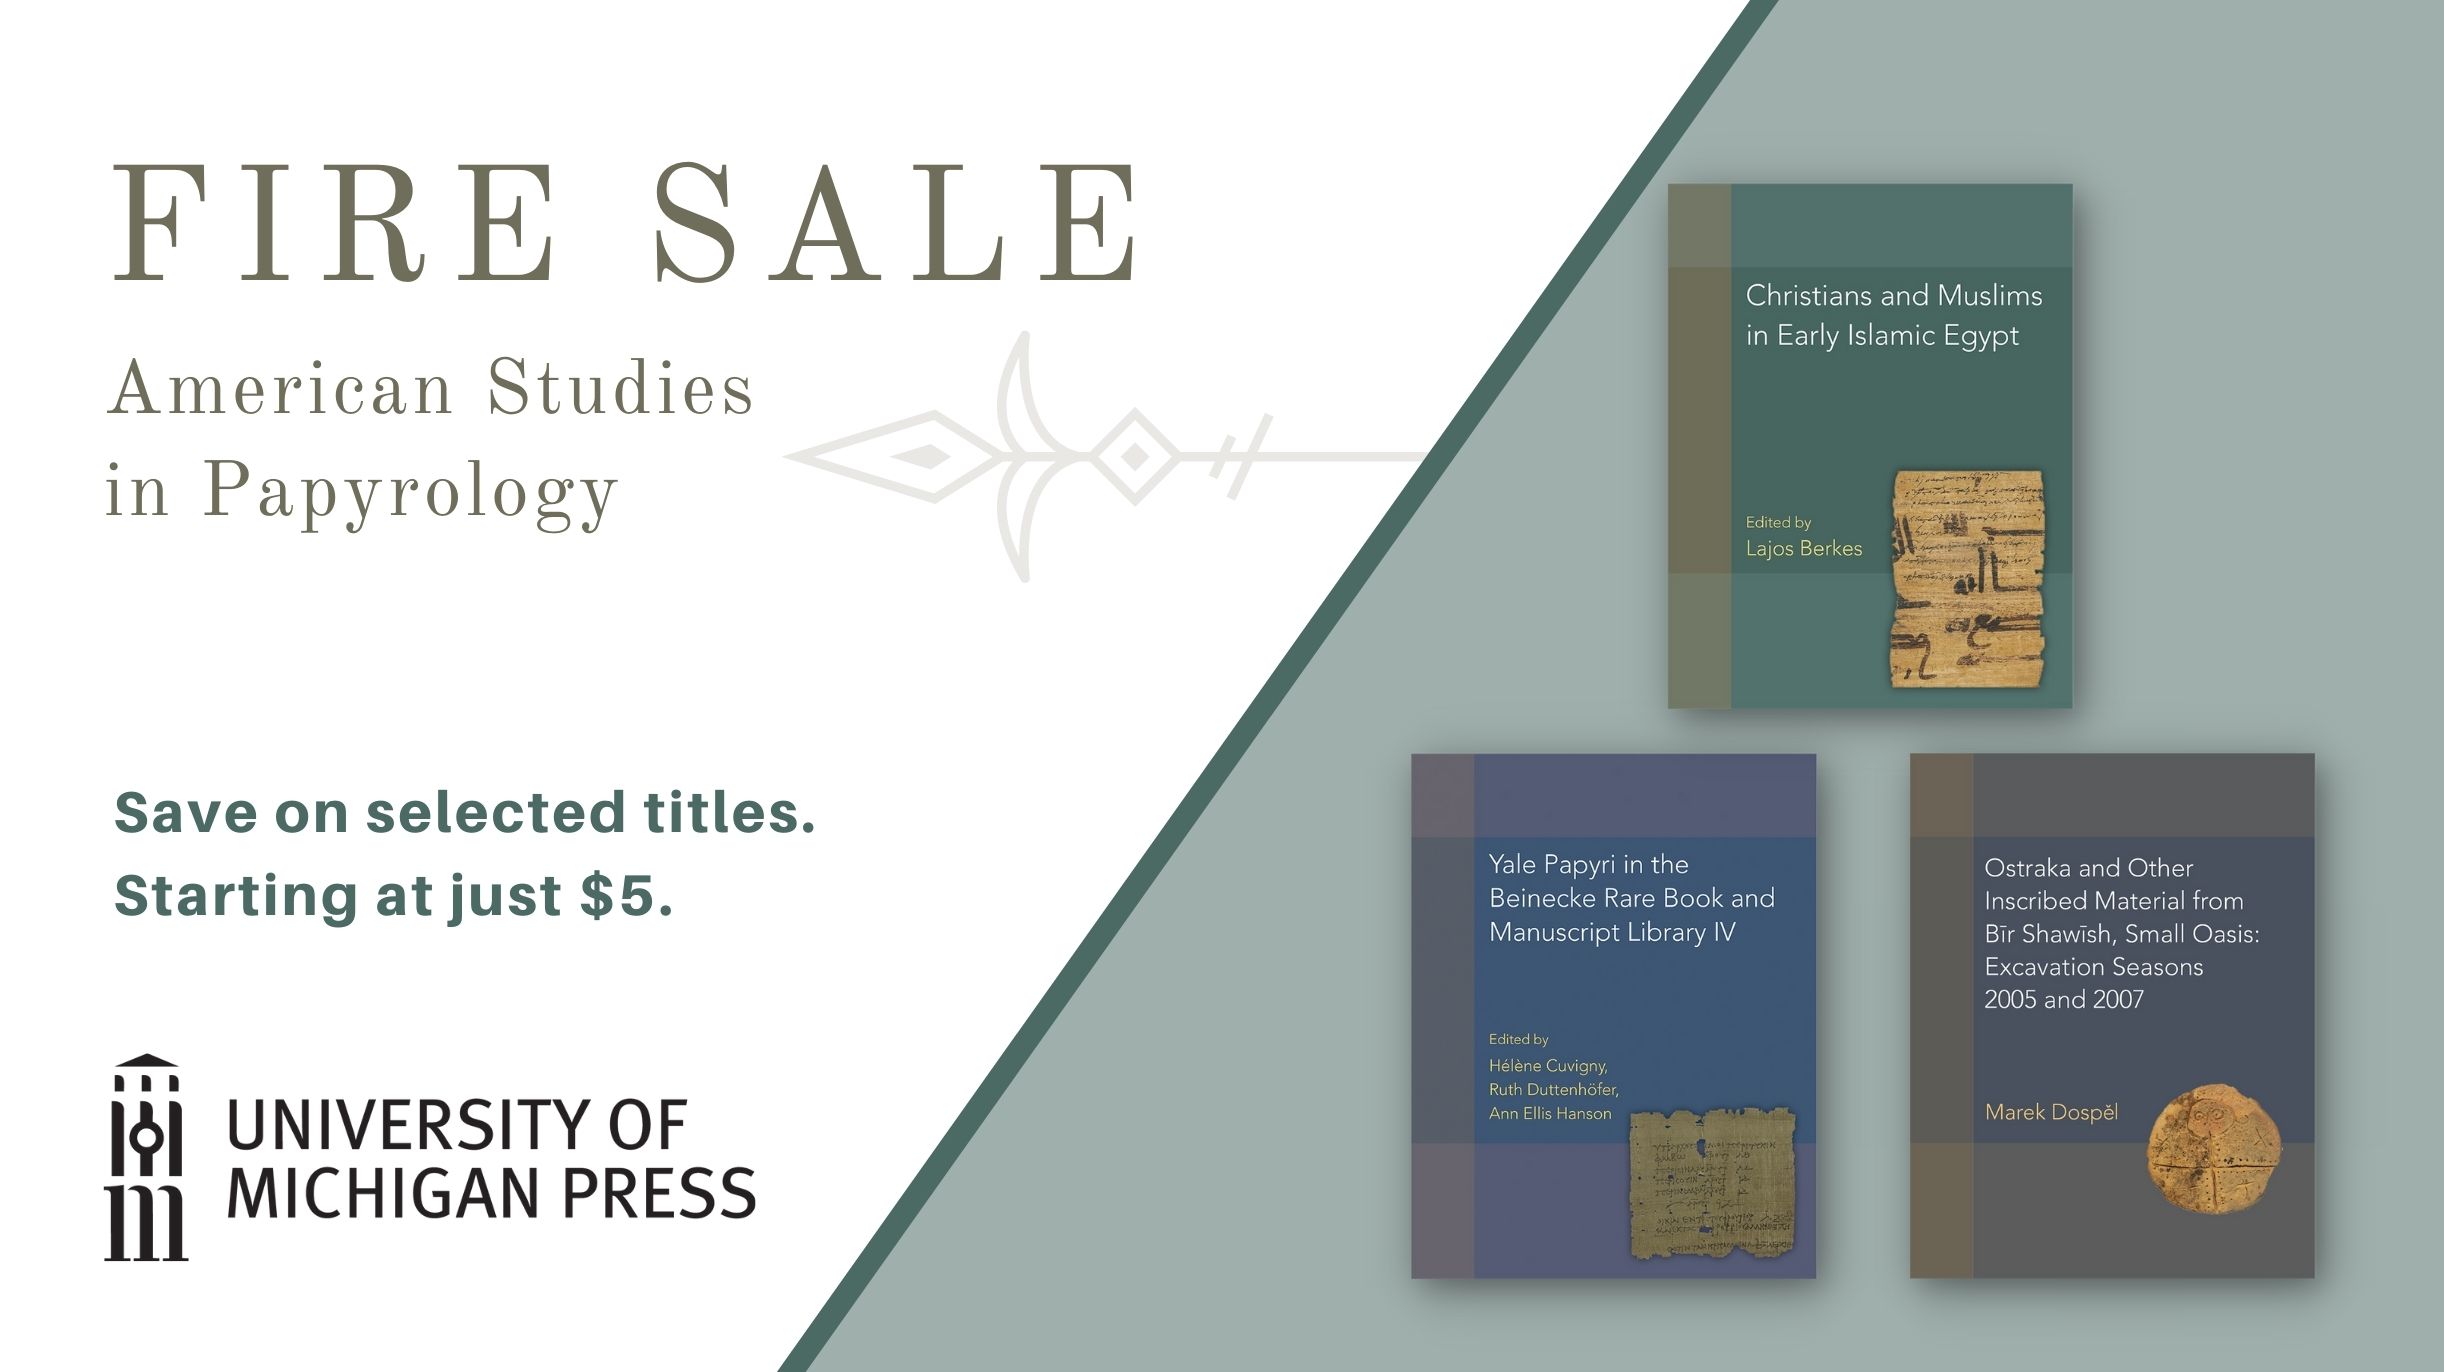 Fire Sale: American Studies in Papyrology. Save on selected titles. Starting at just $5. Complete list of sale titles is available in the link.